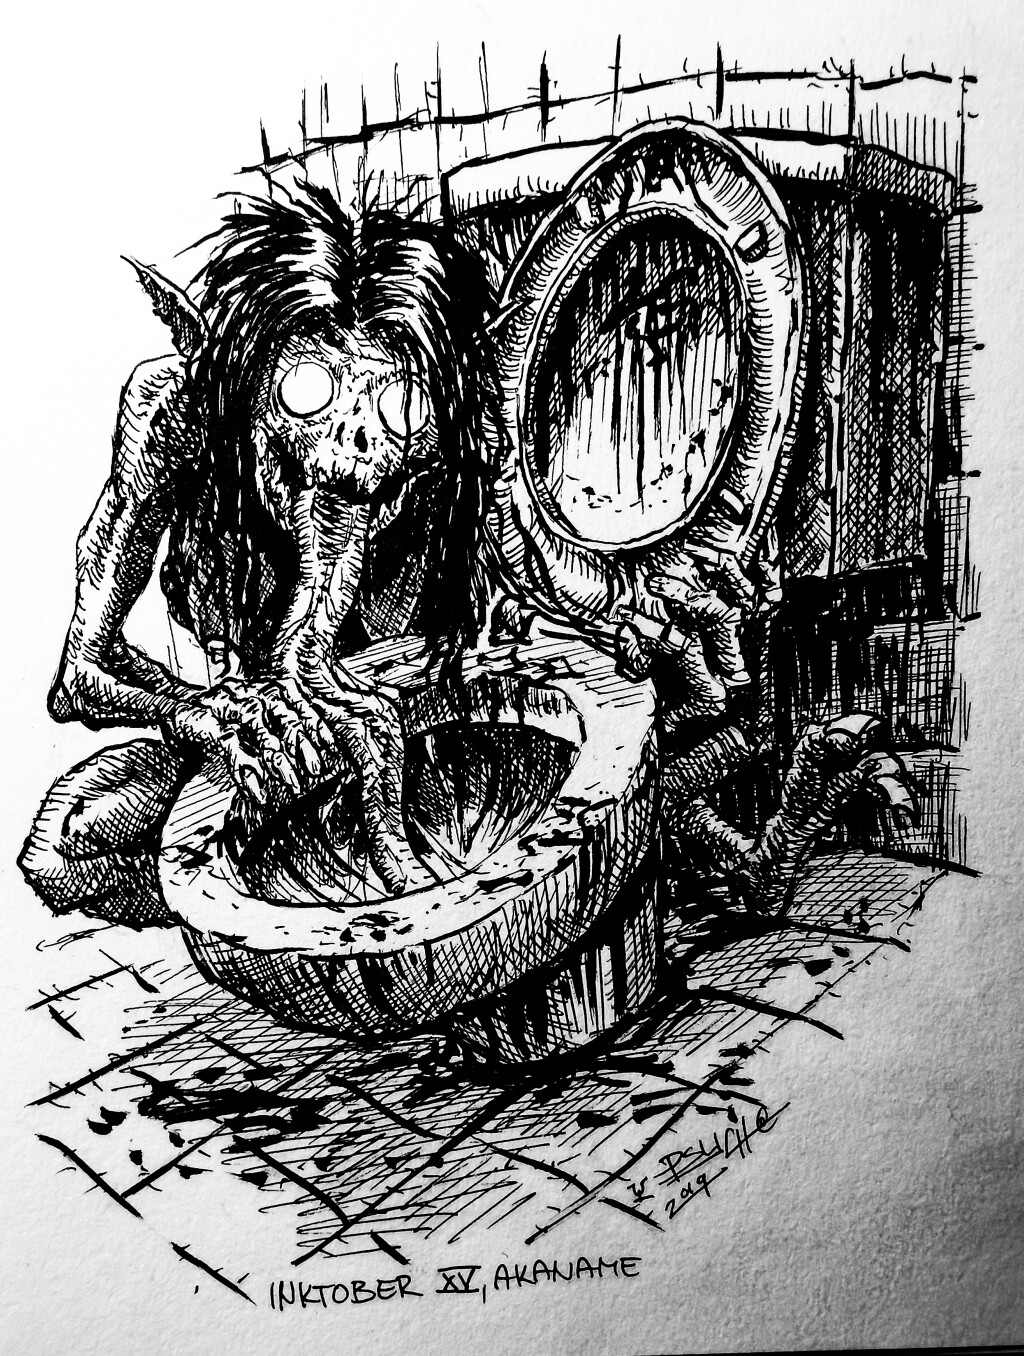 Akaname - Its name means "Filth Licker" and it is appearing in Japanese folklore. It takes residence in dirty bathrooms and toilets where it licks old hair, mold and dirt. Its saliva is poisonous.